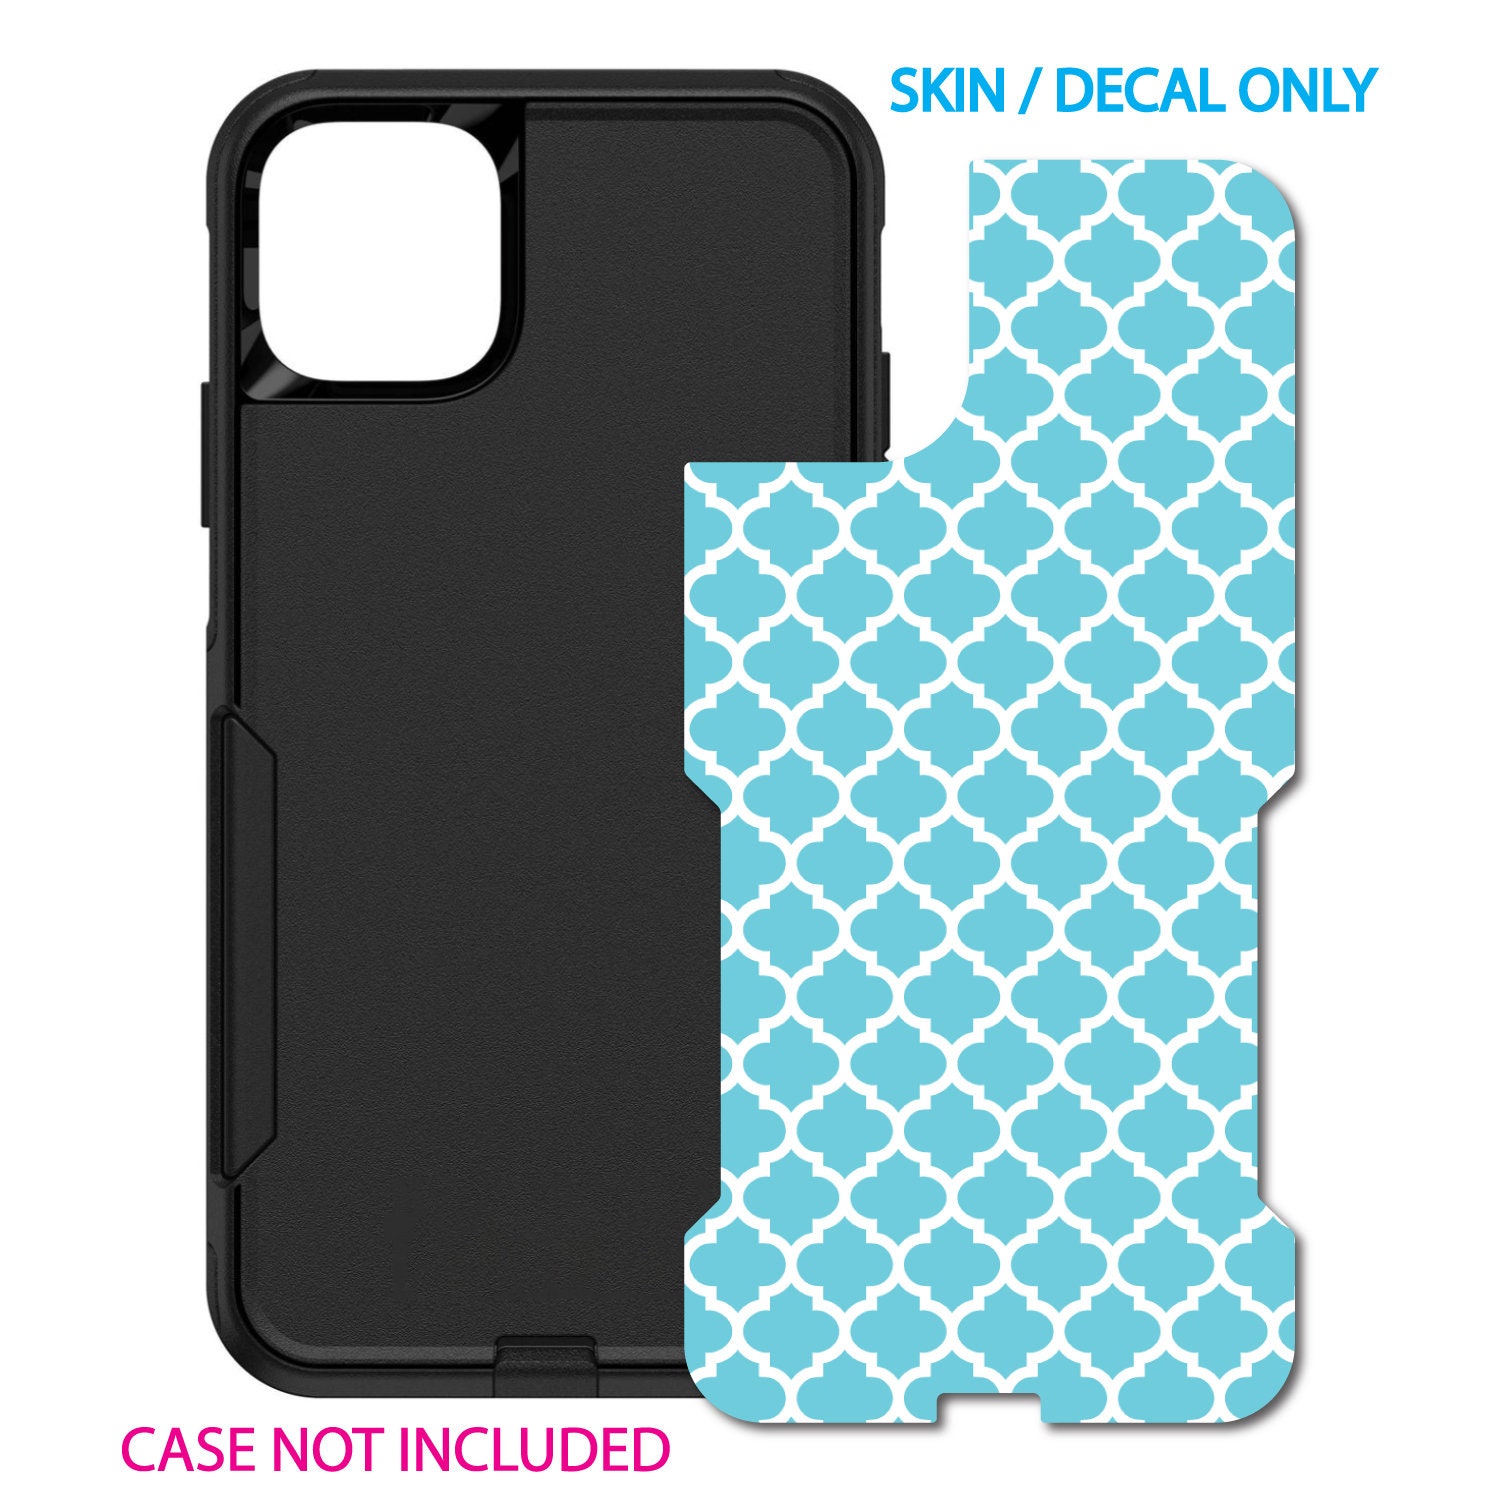 Teal White Large Chevron Stripes Apple iPhone Samsung Galaxy Custom Personalized Skin/Decal for OtterBox Commuter Case